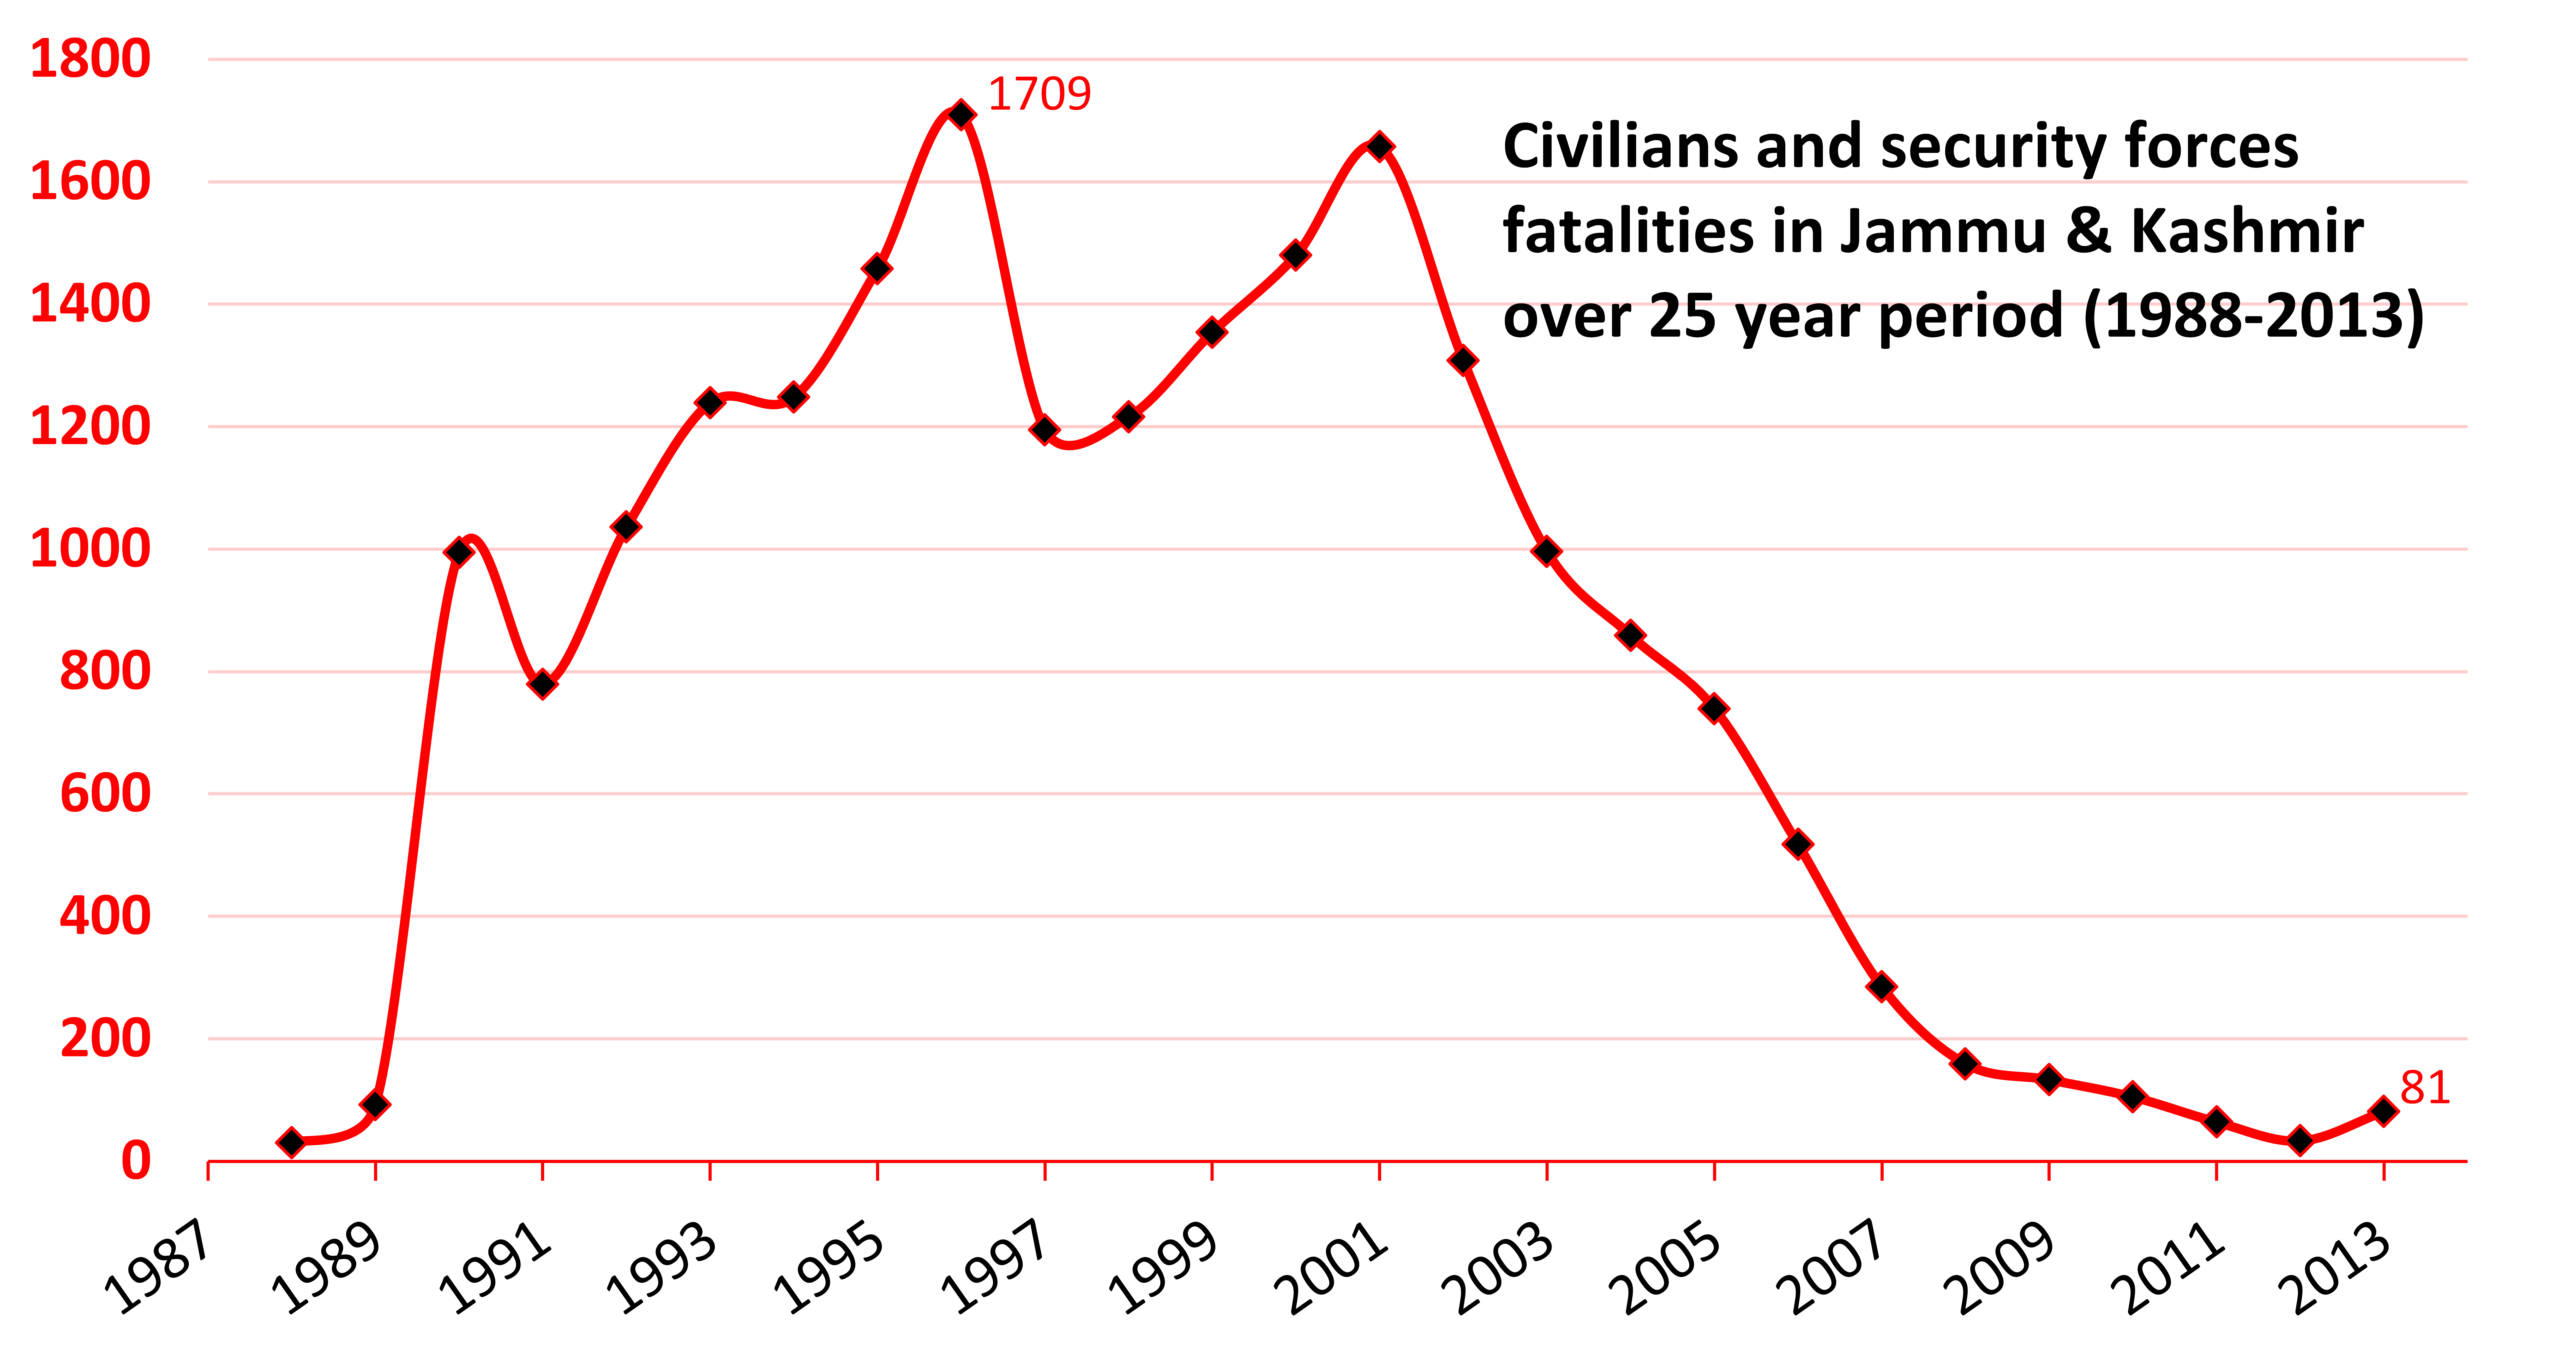 Insurgency_Terror-related_Fatalities_of_Civilians_and_Security_Forces_in_Jammu_and_Kashmir_India_from_1988_to_2013.png